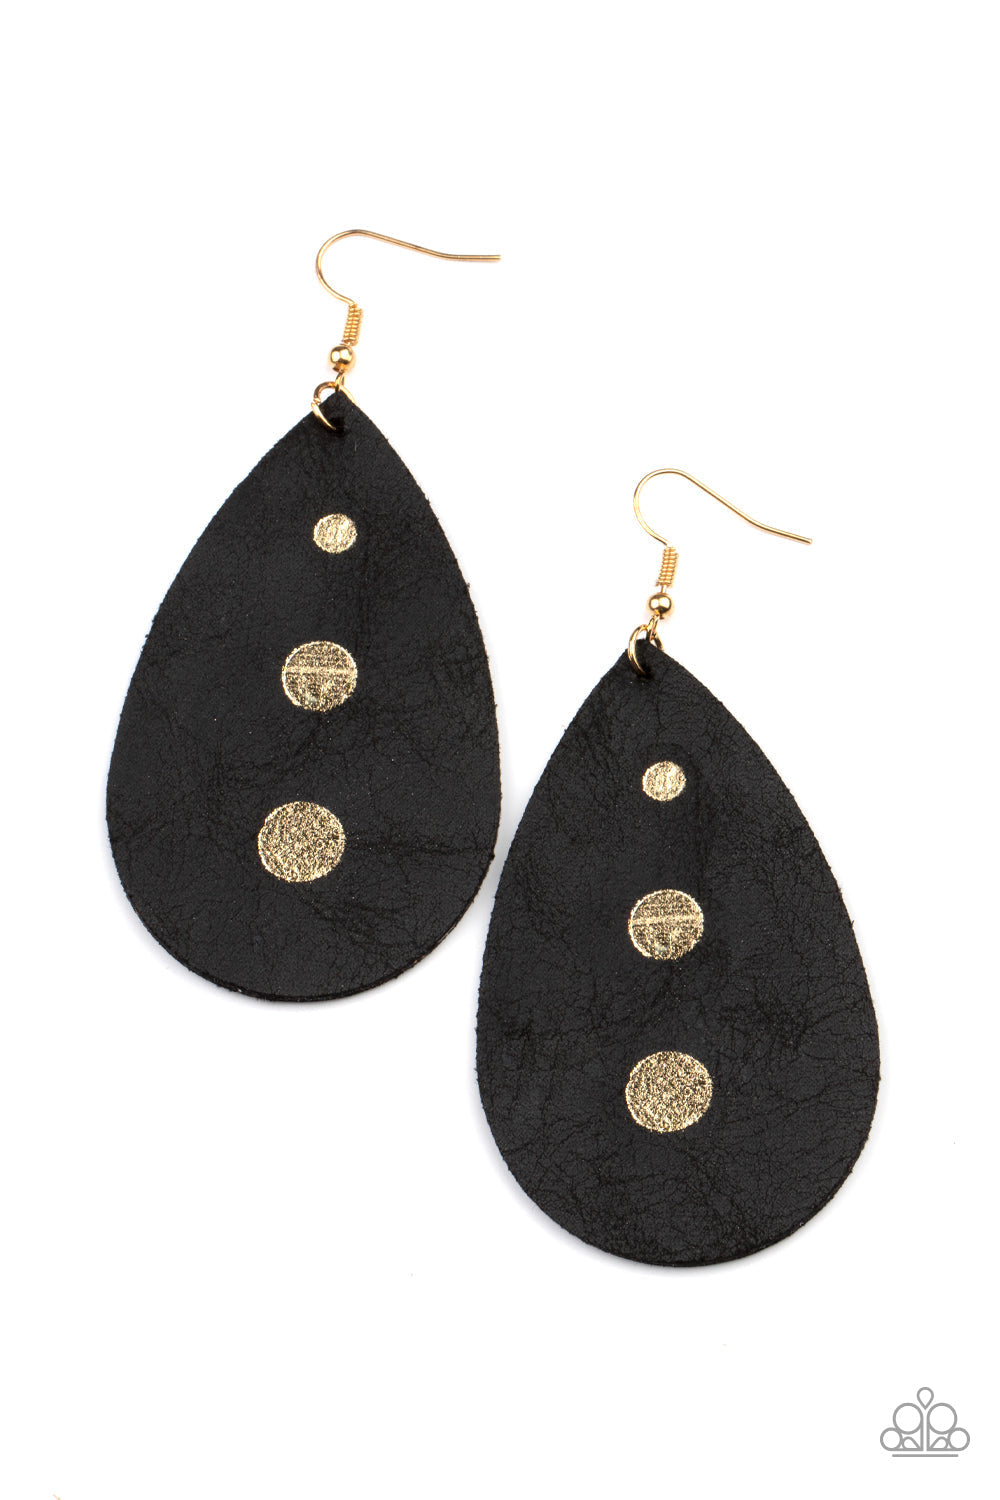 Rustic Torrent - Black and Gold Leather Earrings - Paparazzi Accessories - The front of a distressed leather teardrop frame is adorned with three shimmery gold paint drops, creating a rustic elegance. Earring attaches to a standard fishhook fitting. Sold as one pair of earrings.